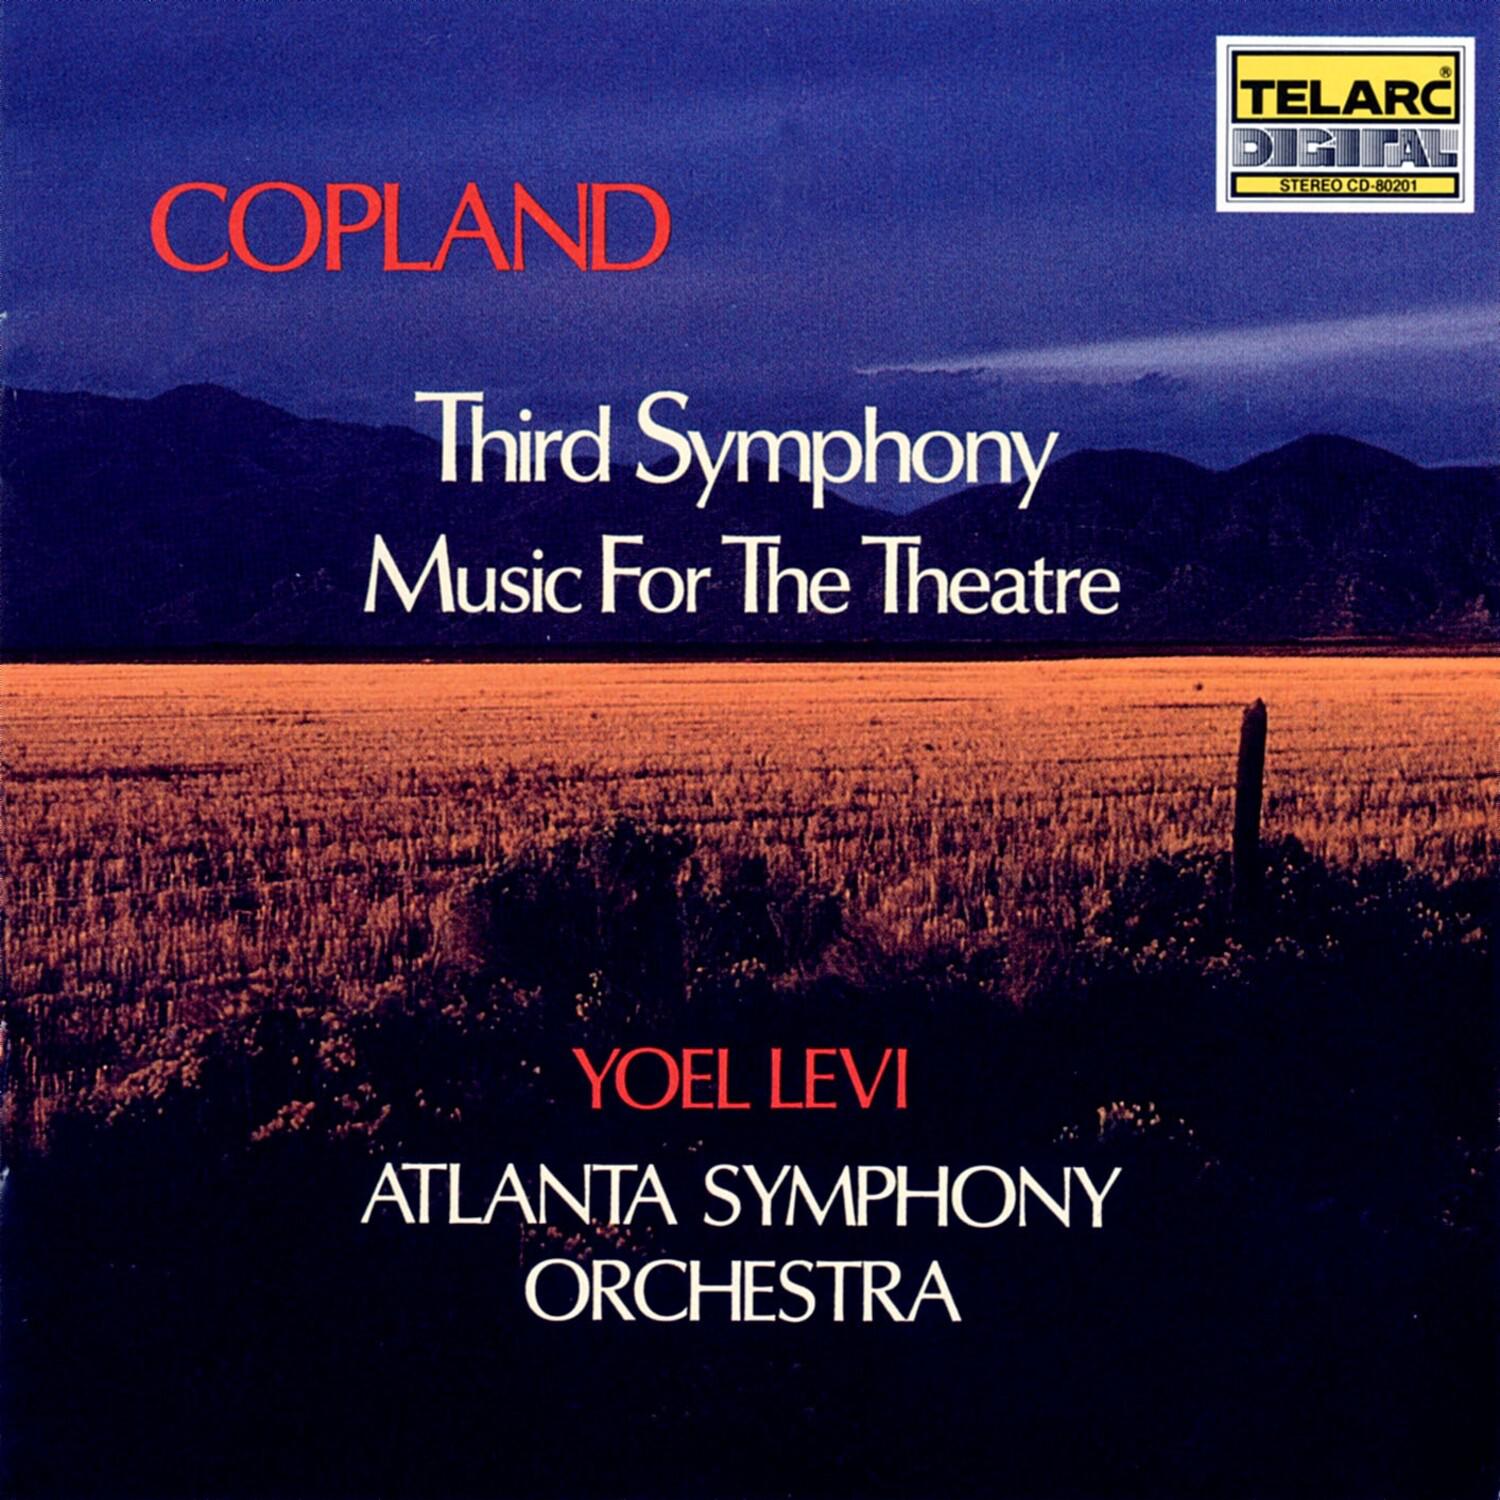 Copland: Third Symphony & Music For Theatre